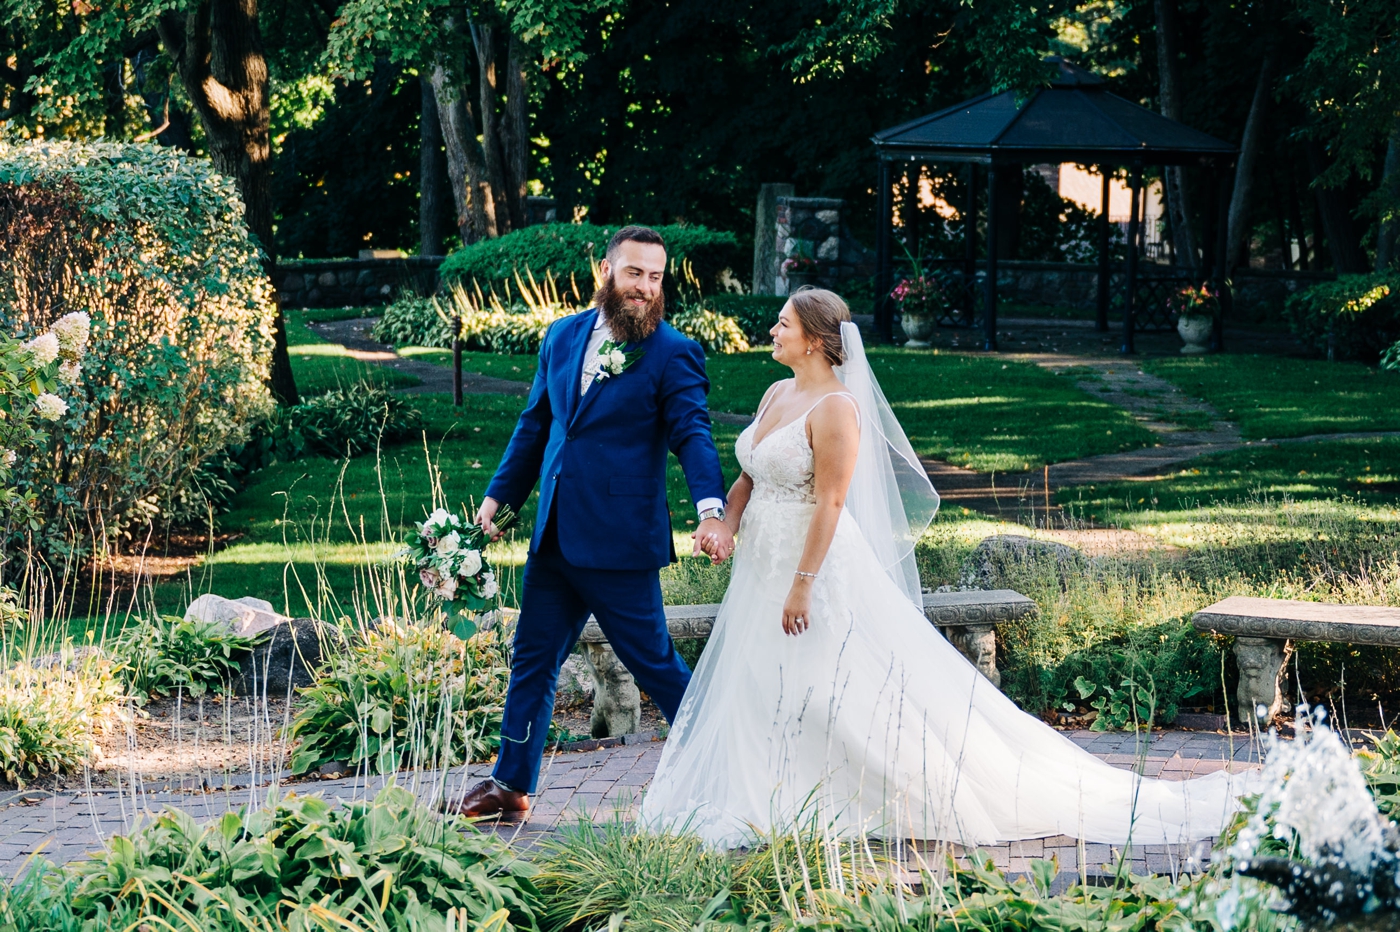 Bride and groom outdoor wedding portraits at Pine Knob Carriage House